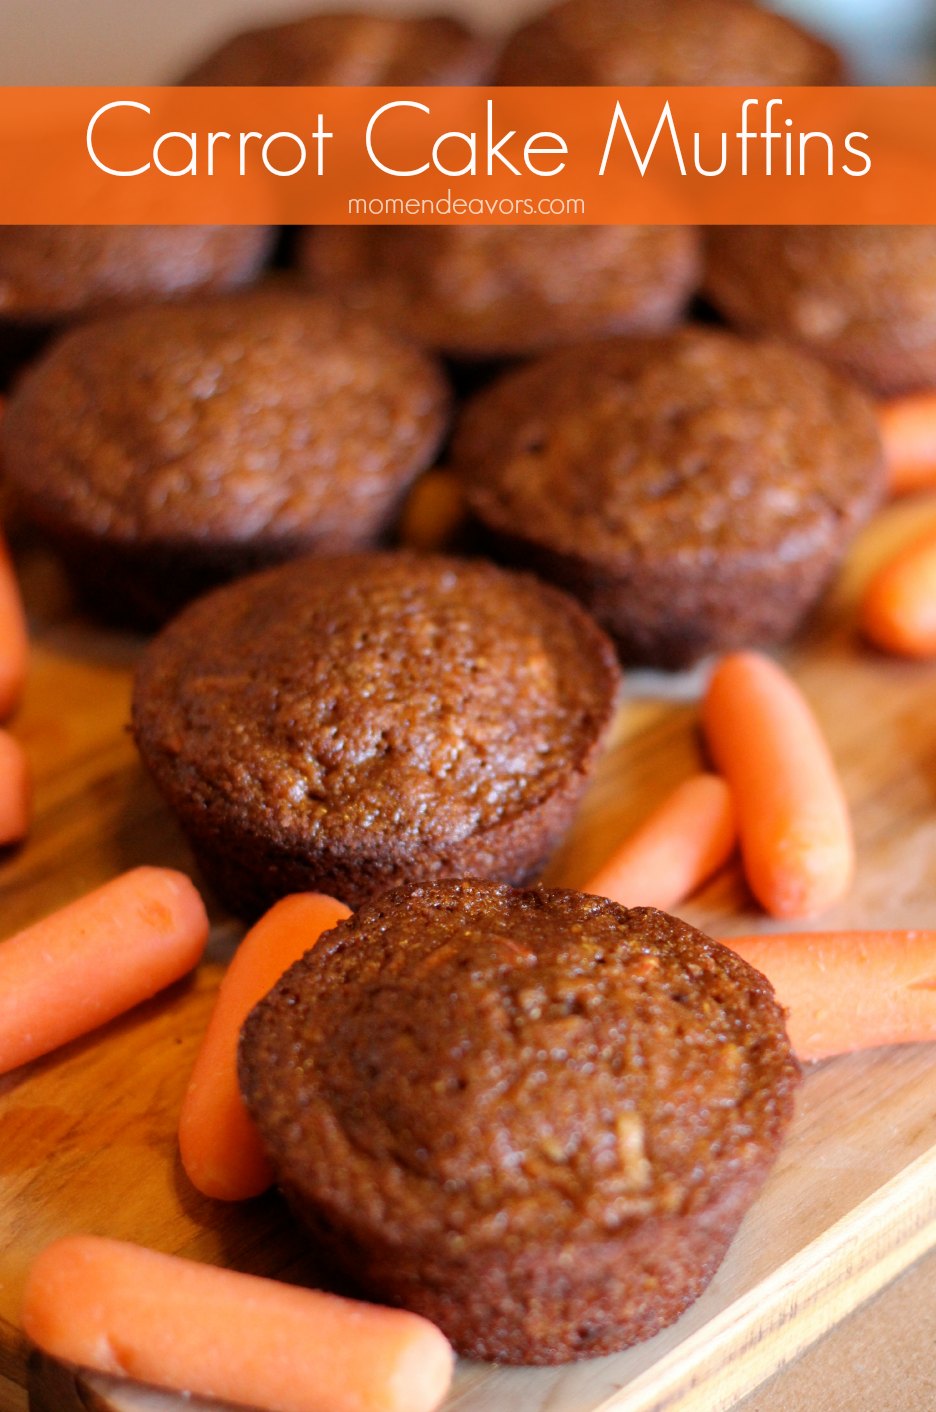 Carrot Cake muffins